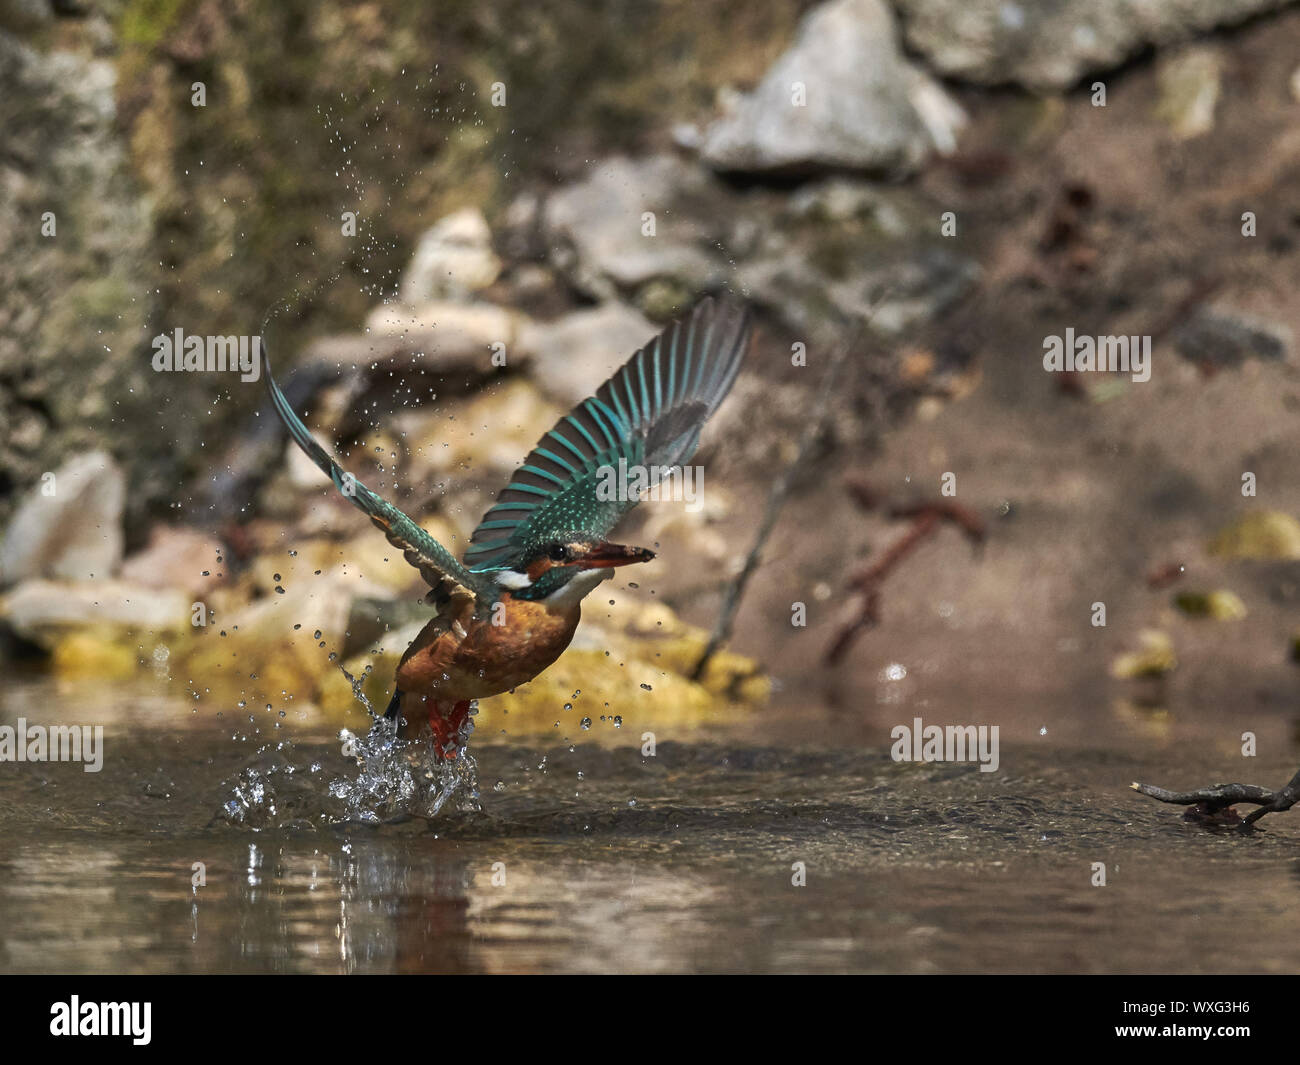 Kingfisher Banque D'Images